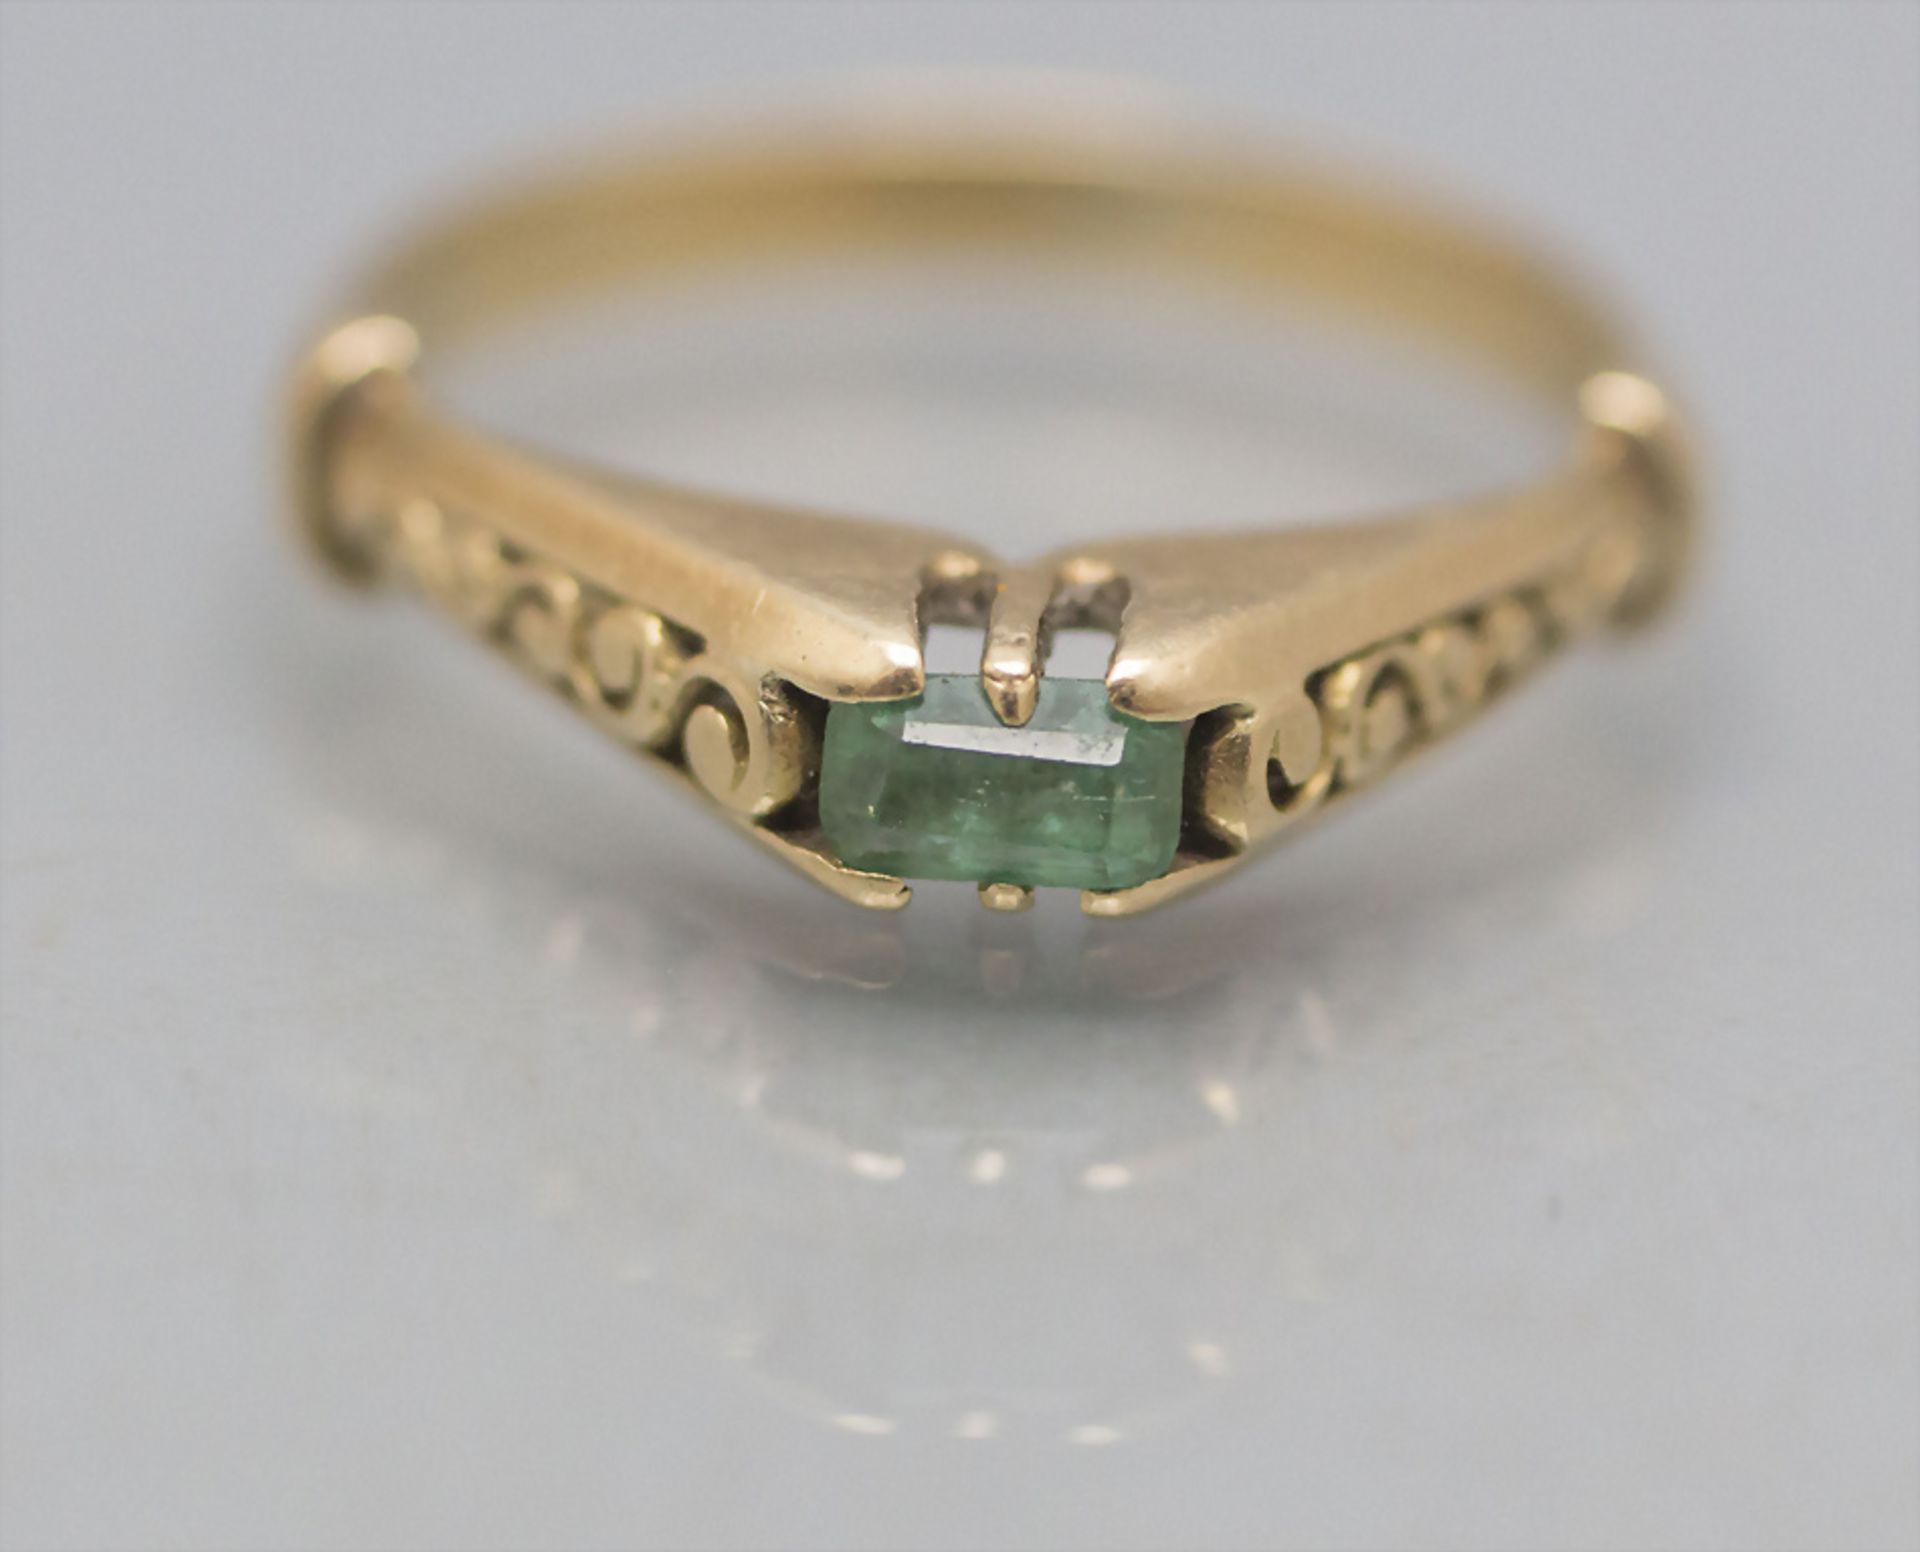 Damenring mit Smaragd / A ladies 14 ct gold ring with emerald